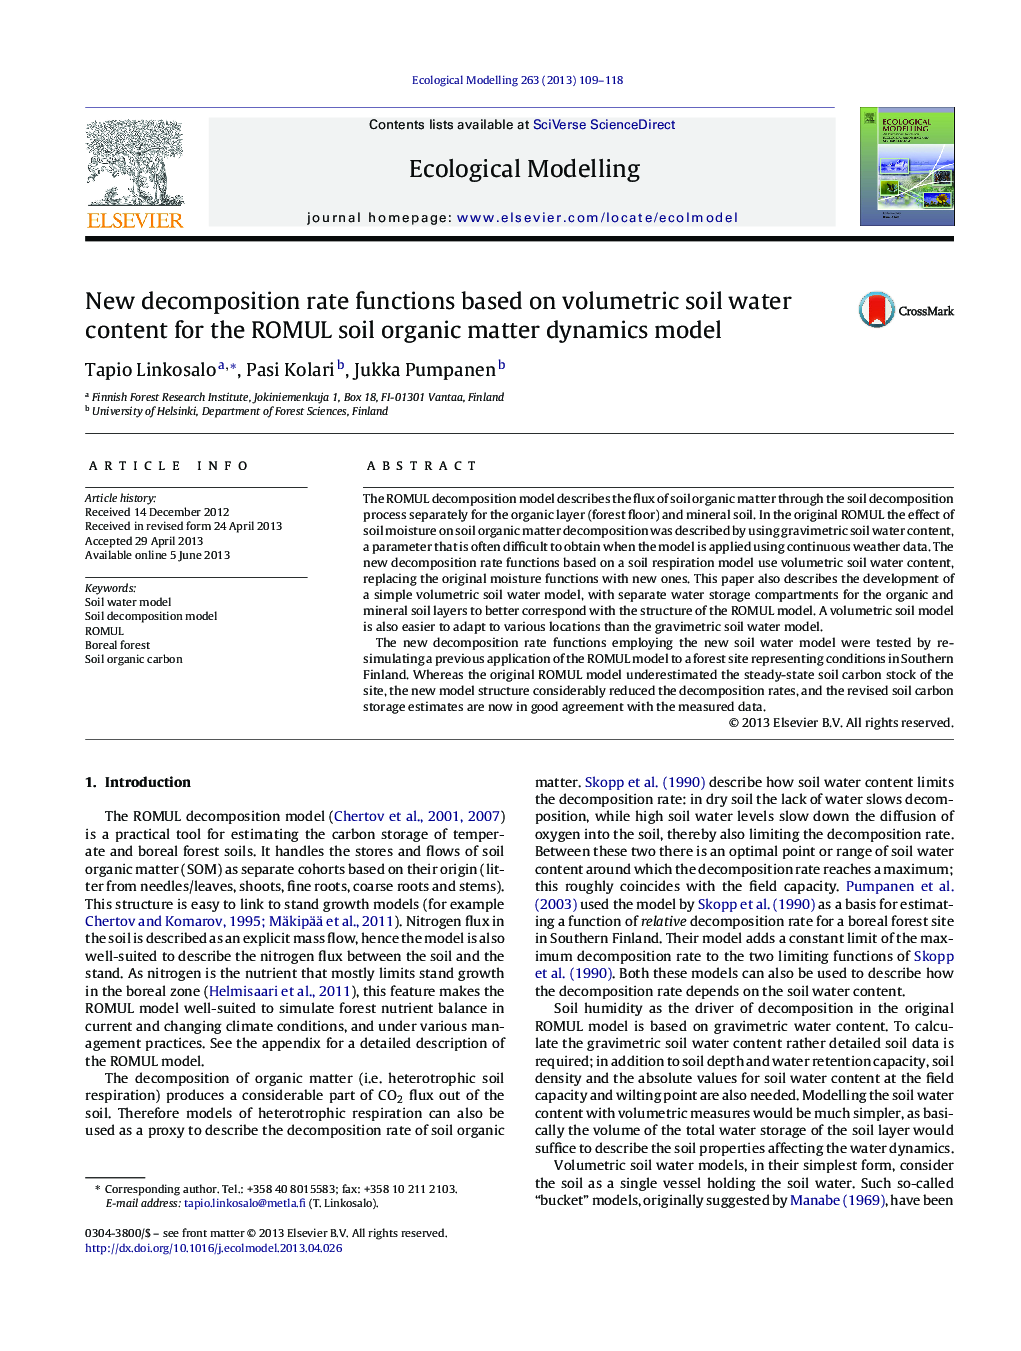 New decomposition rate functions based on volumetric soil water content for the ROMUL soil organic matter dynamics model